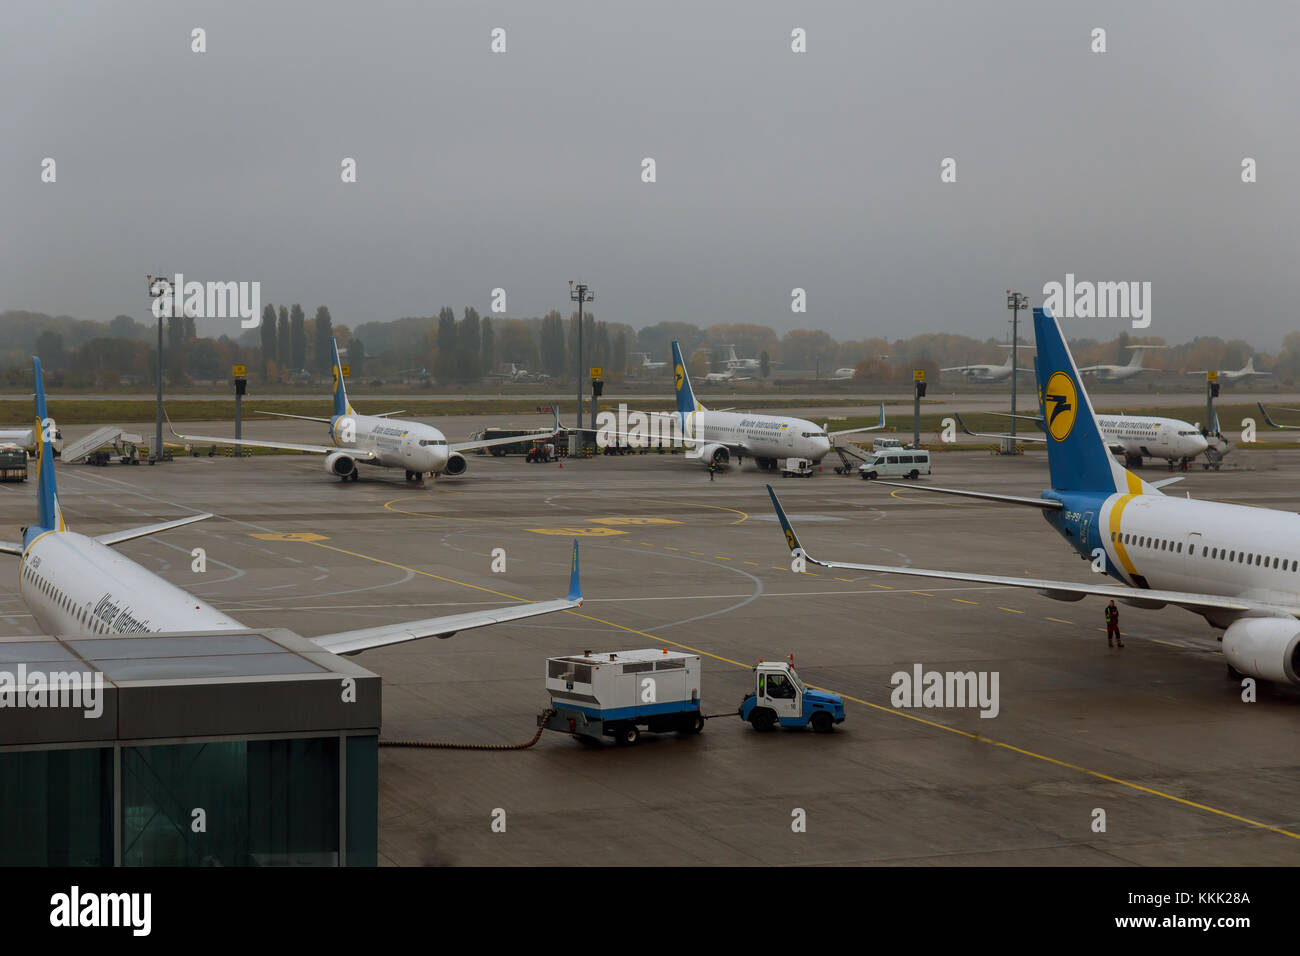 17 OCTOVBET 17 UKRAINE: airplanes at Boryspil airport in Kiev The plane at the airport on loading Stock Photo